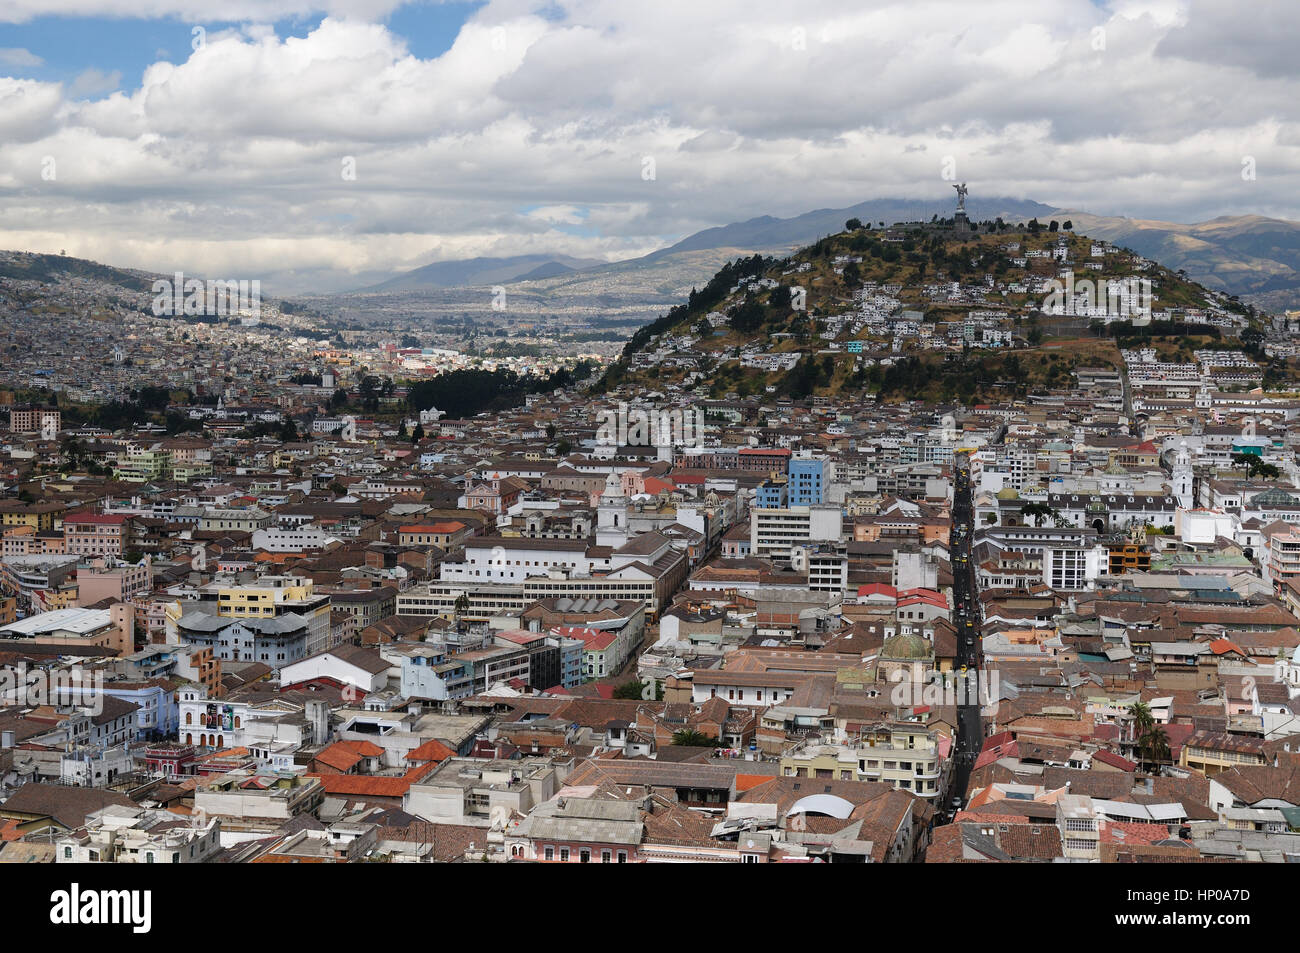 Quito - the capital of Ecuador. Quito is a beautifllly set city, packed with historical monuments and architectural treasures. The picture present vie Stock Photo